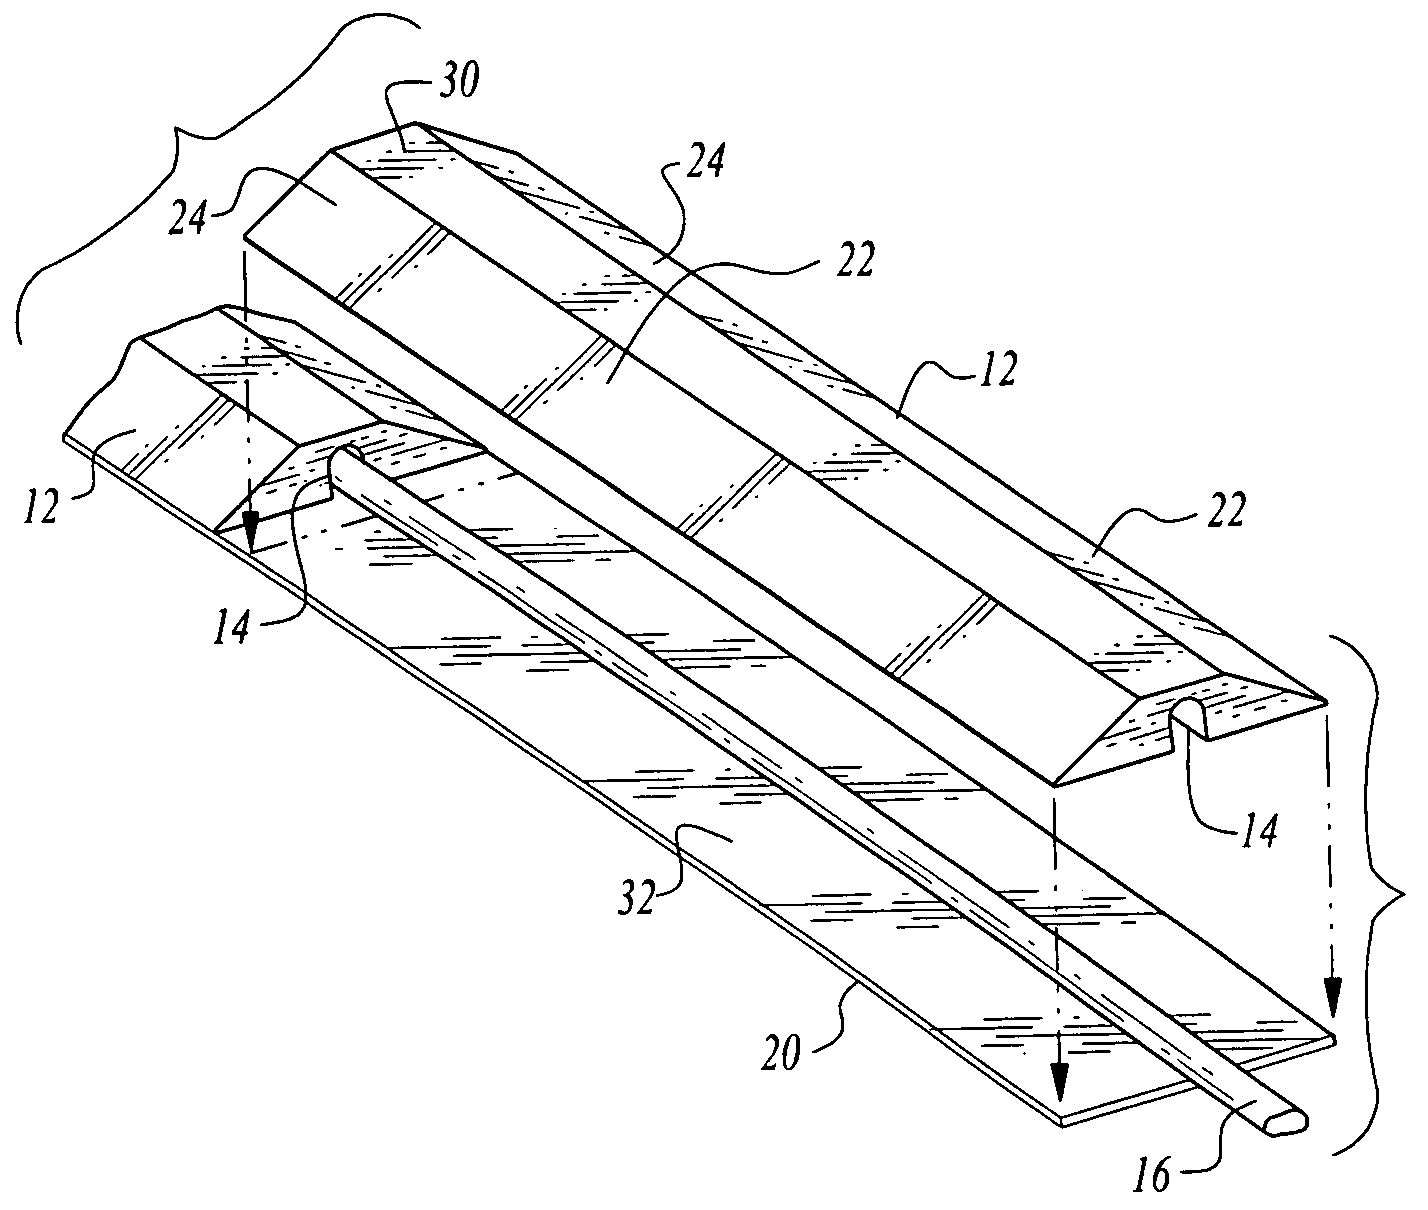 Apparatus for protecting cables or other elongated objects from traffic damage